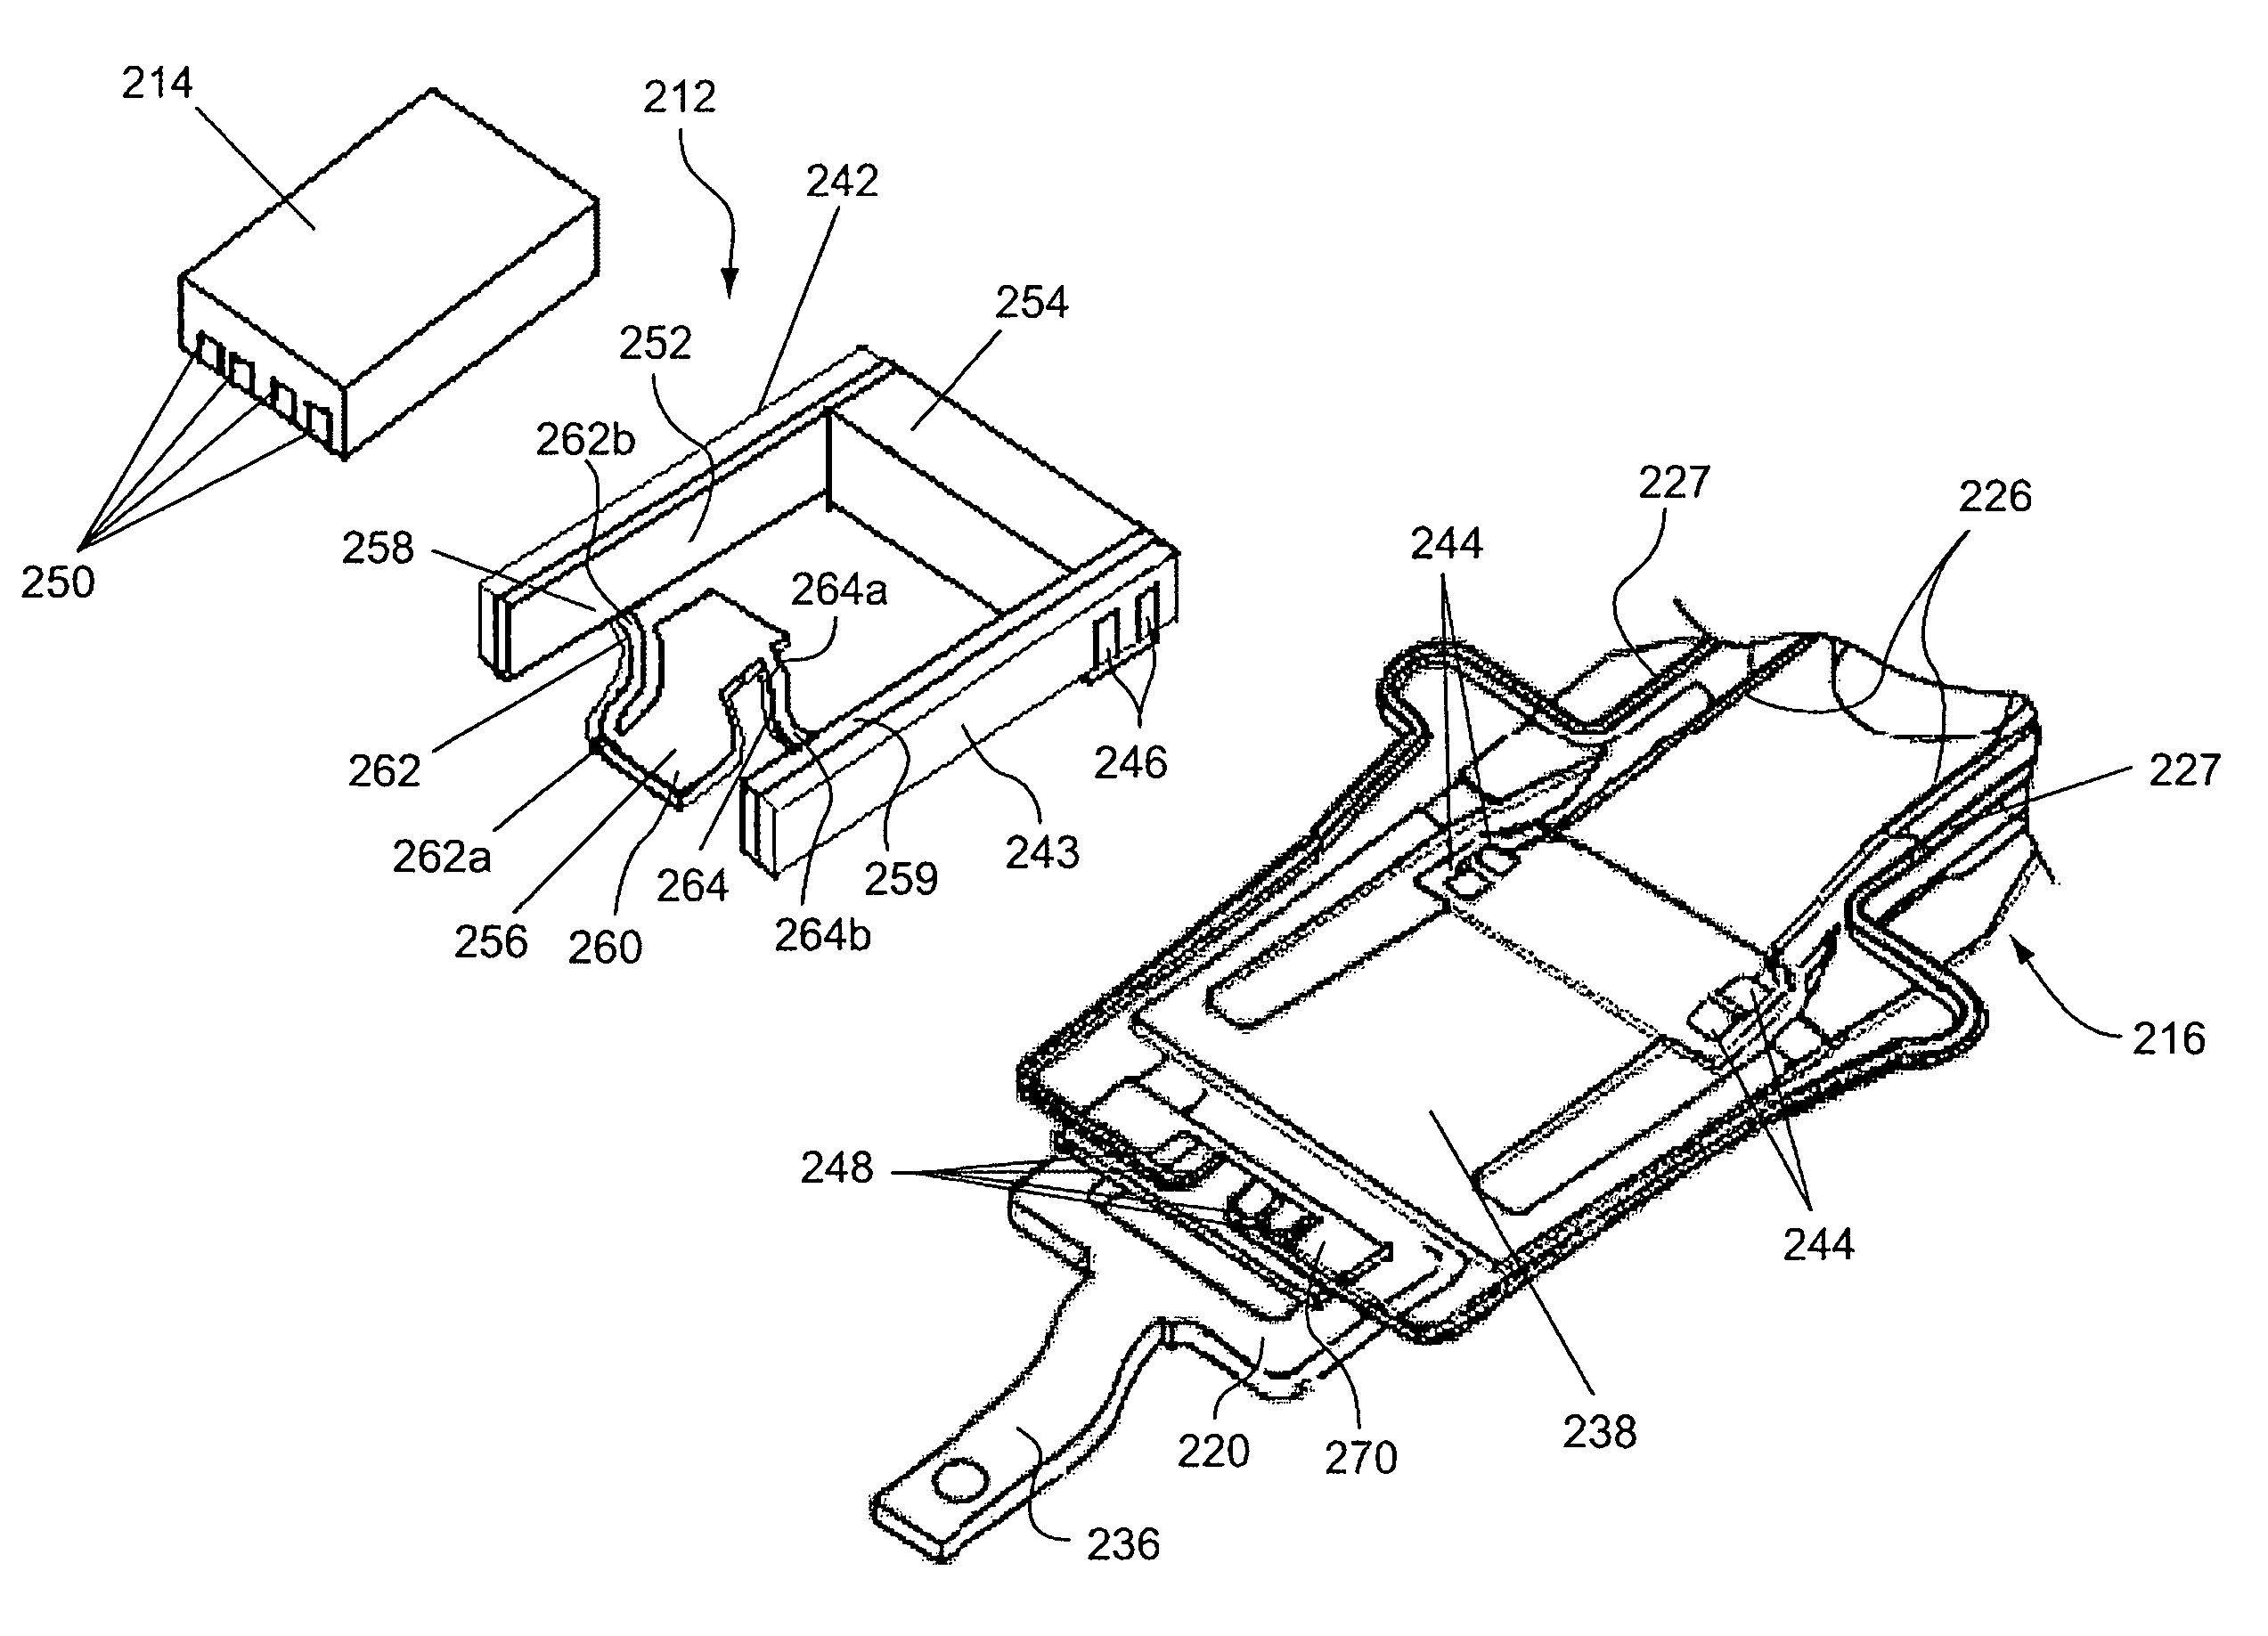 Rotational PZT micro-actuator with a rotatable plate